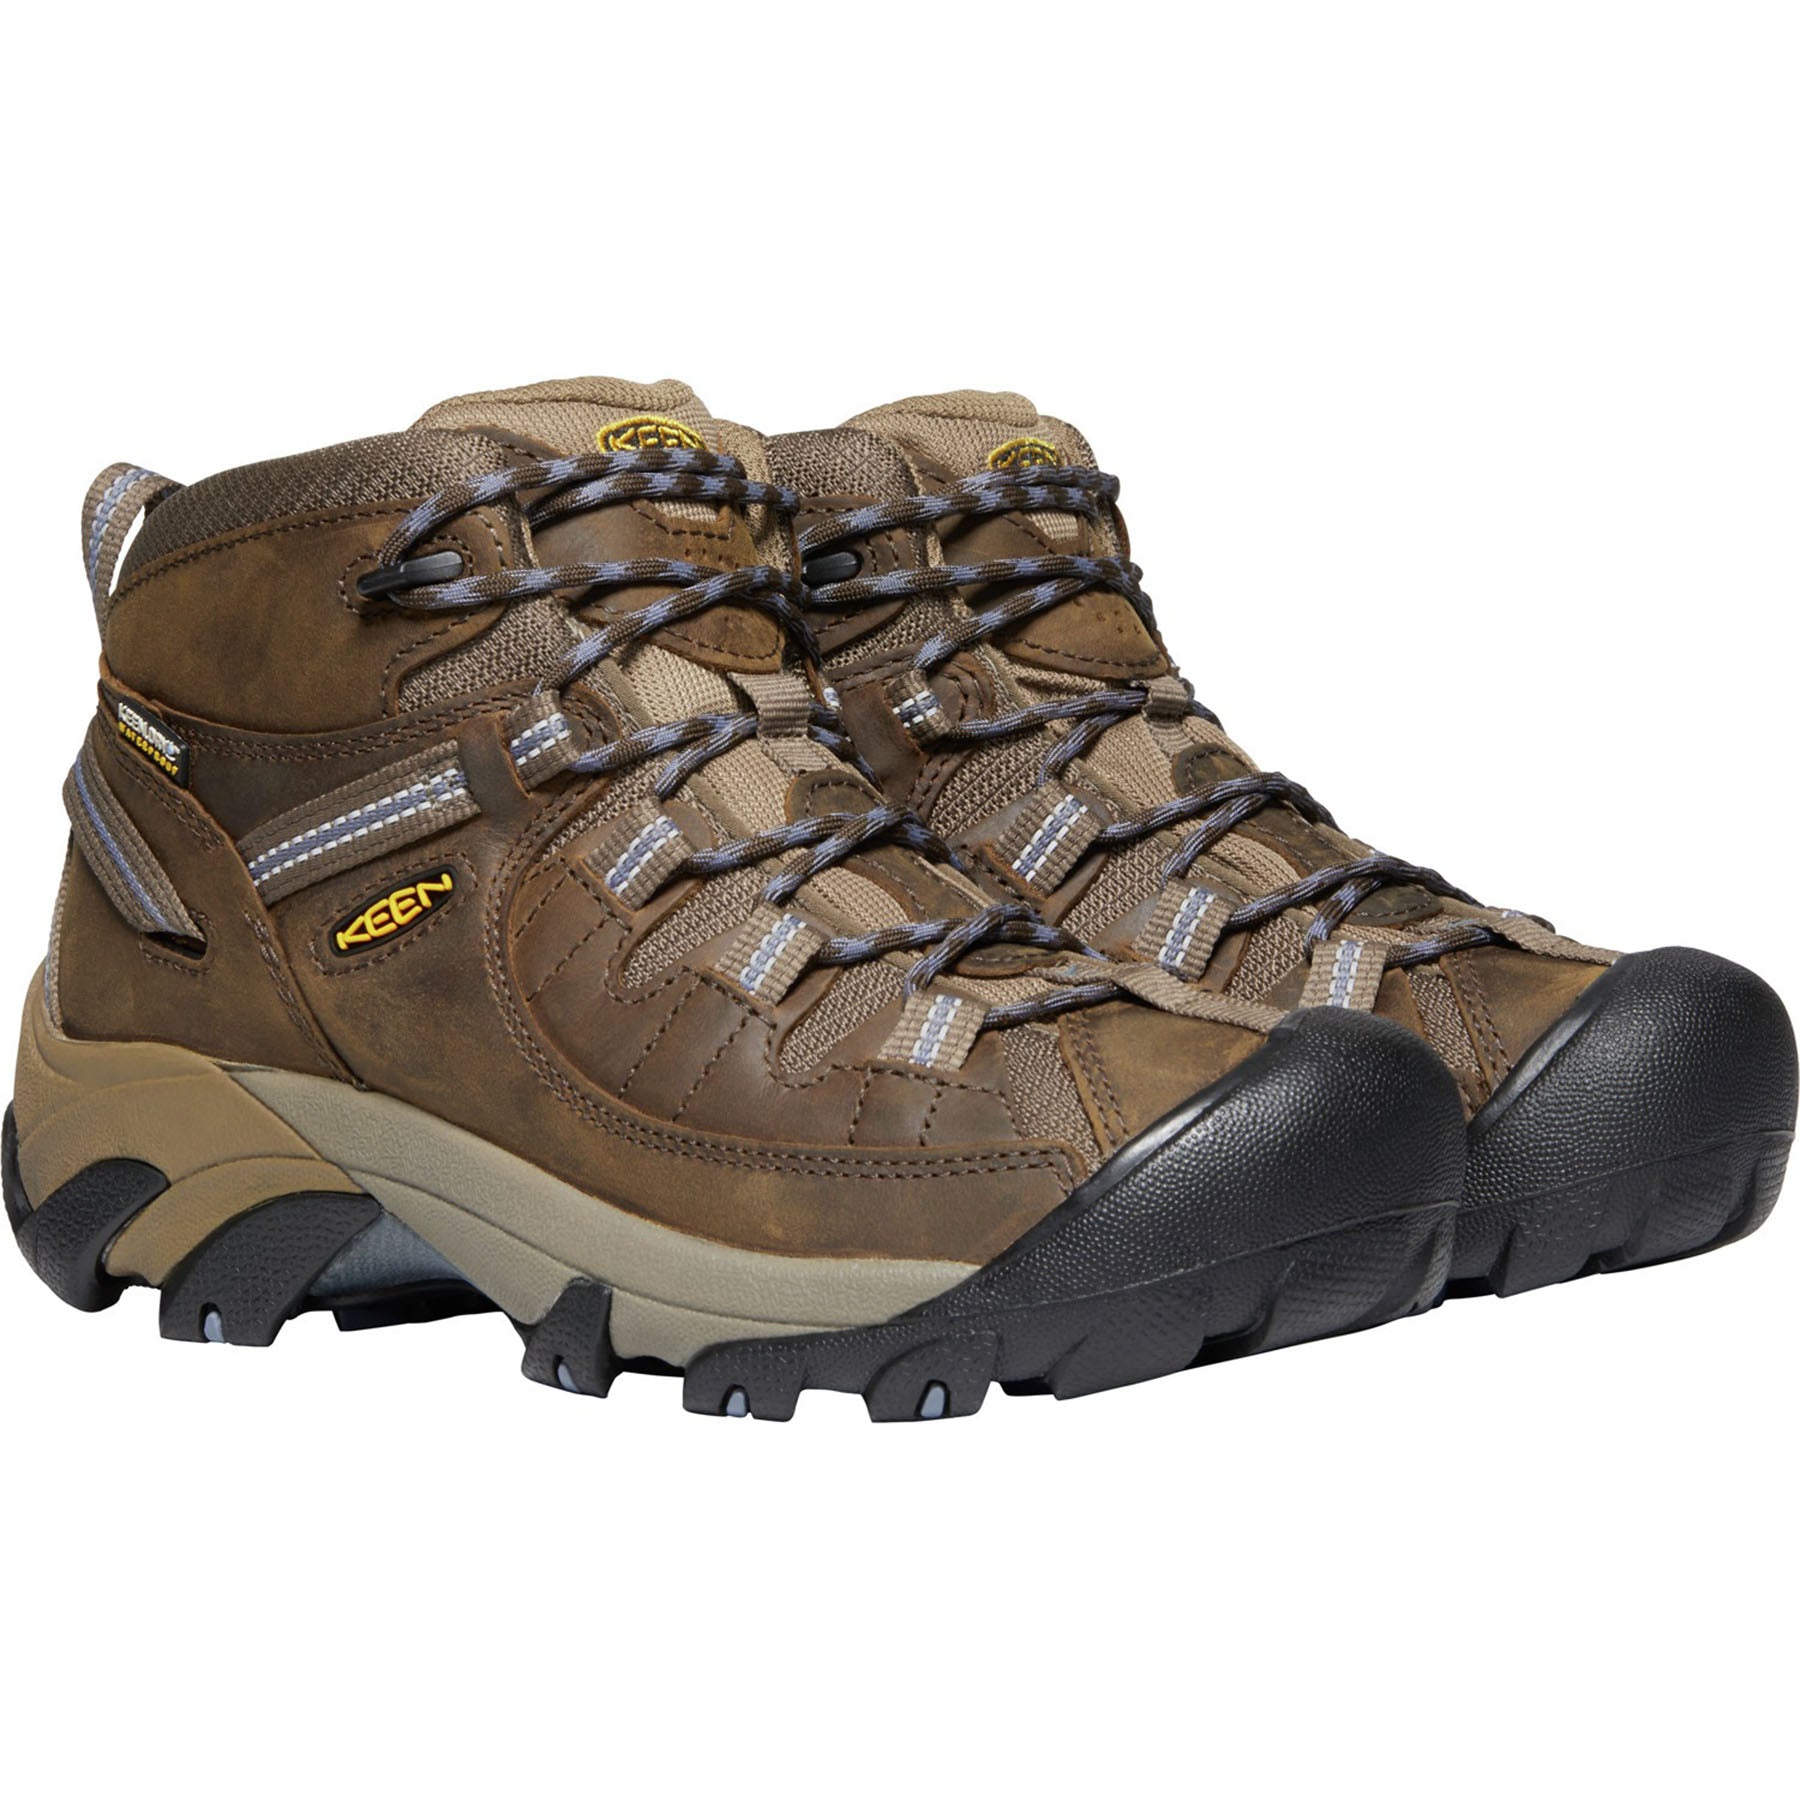 both shoes of the pair of women's targhee II mid boots